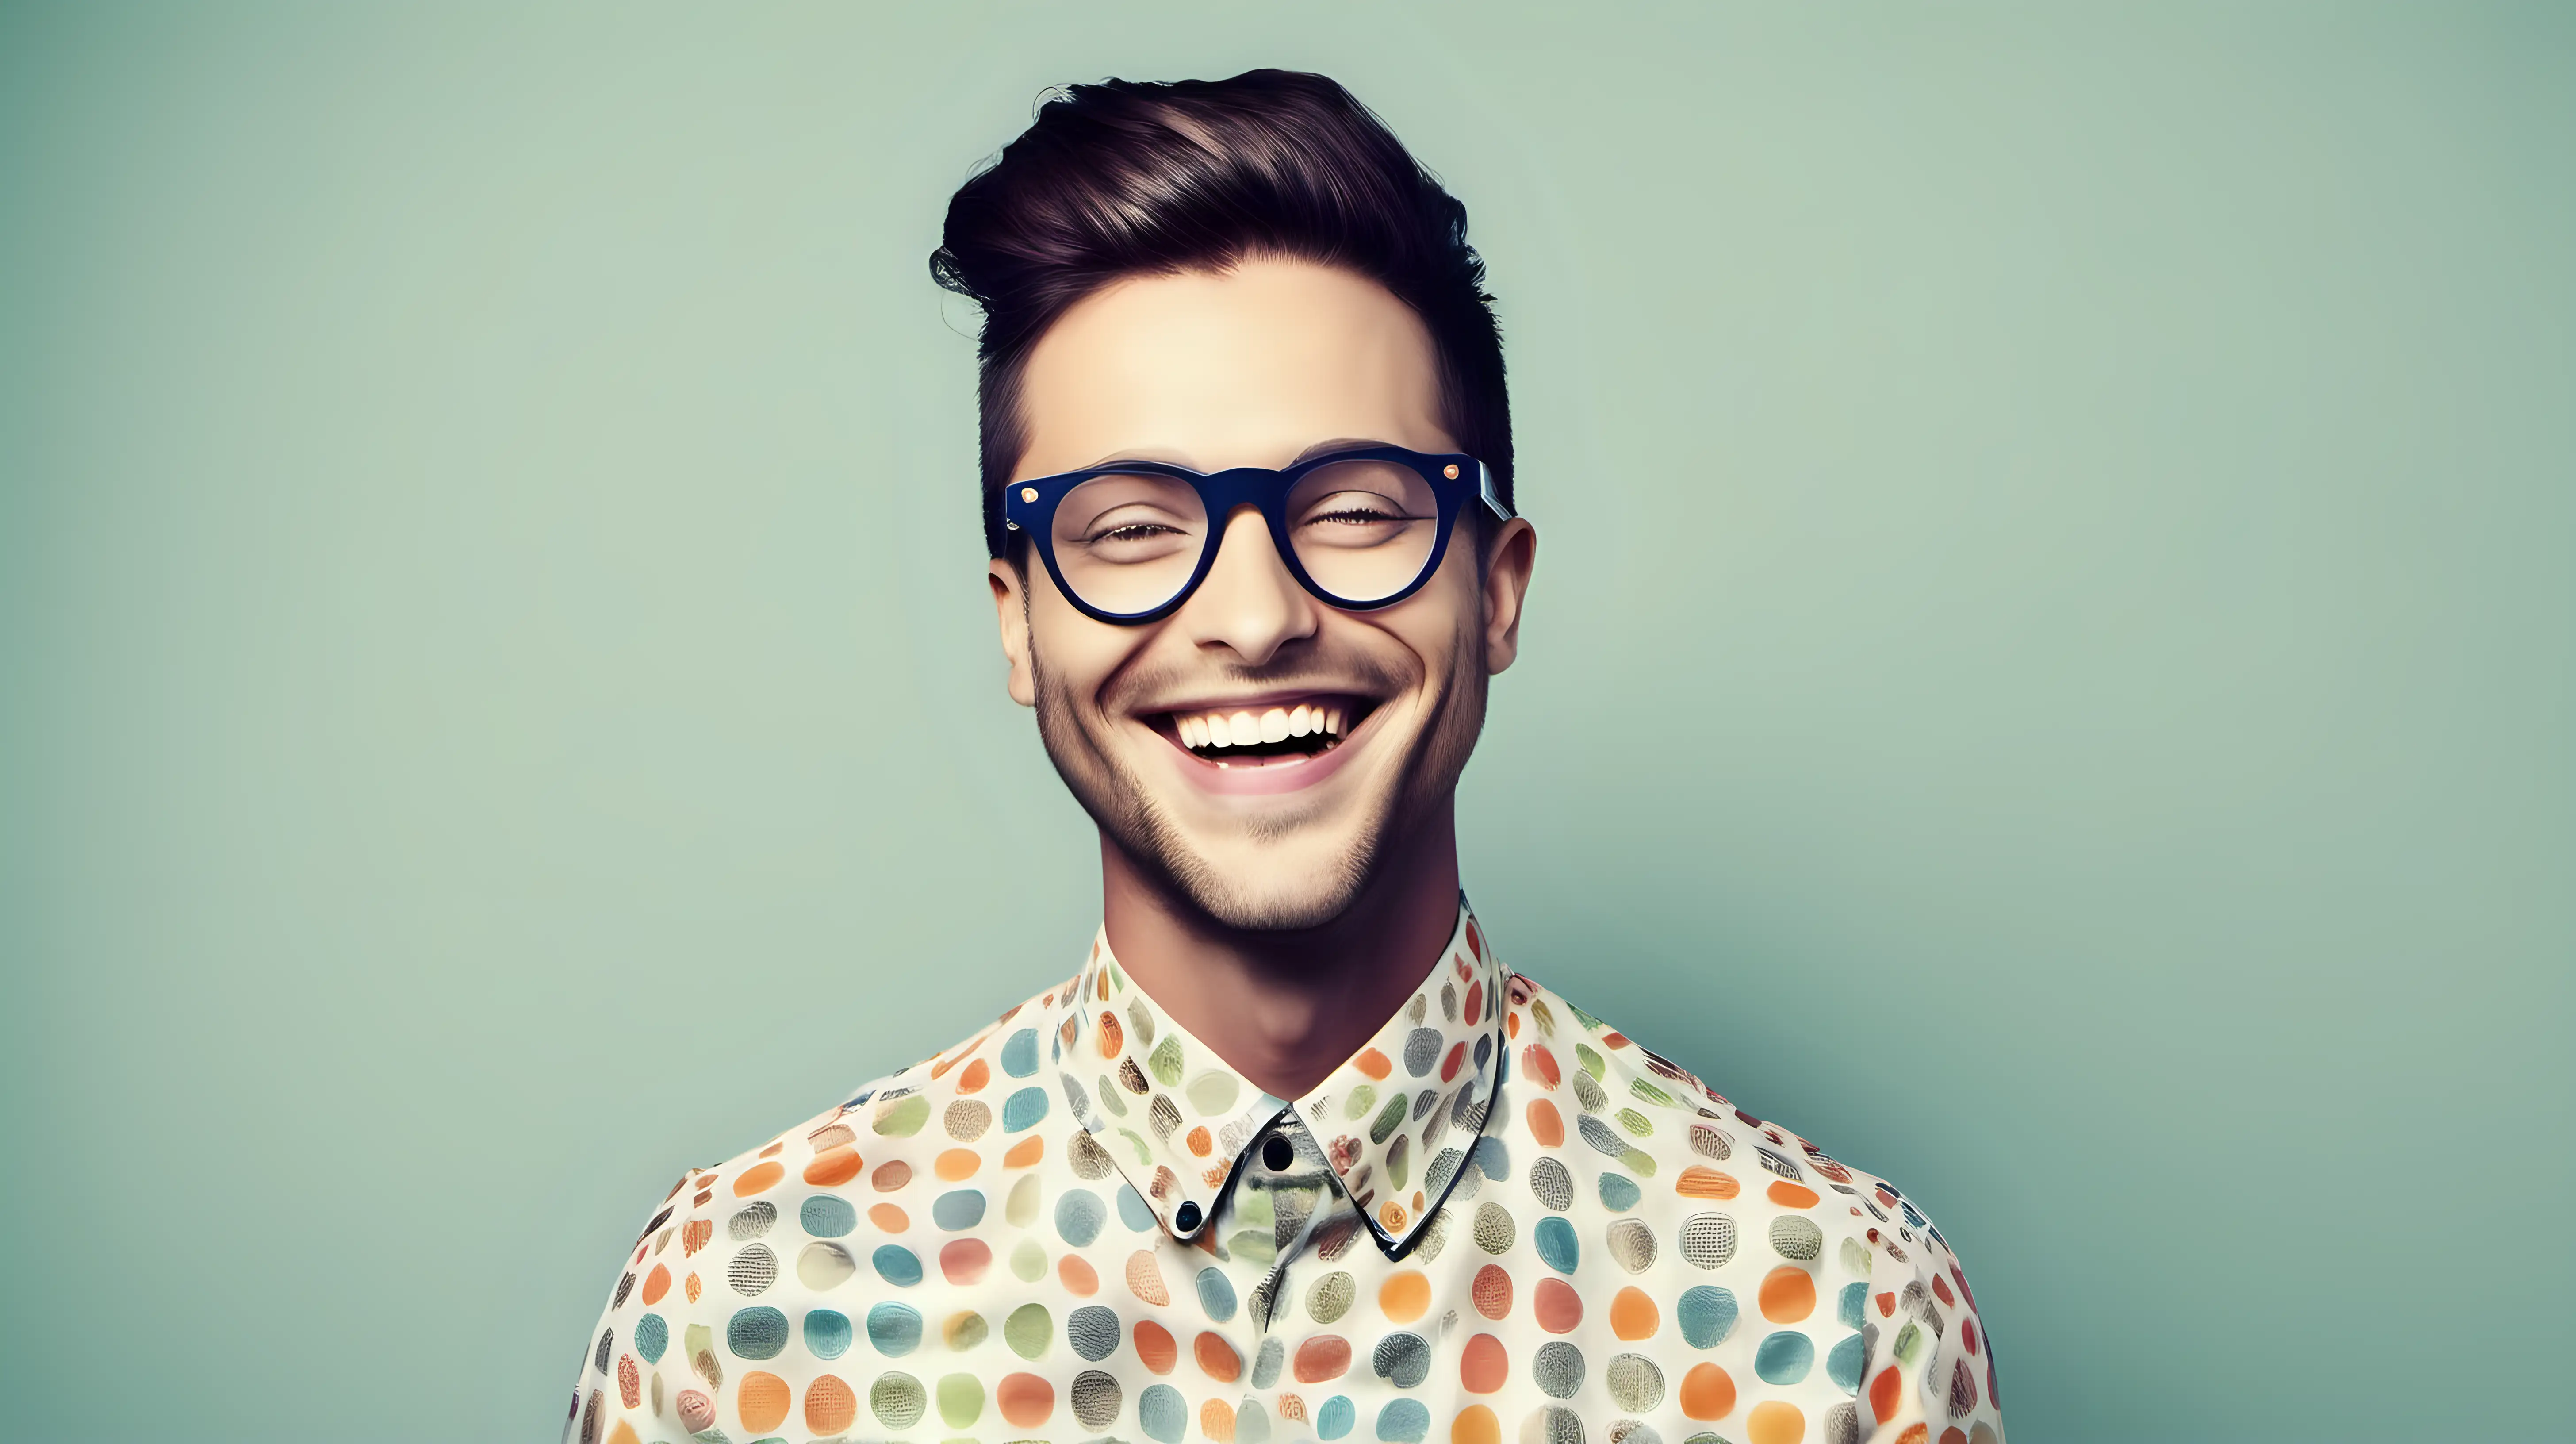 Joyful Person with Patterned Glasses Smiling